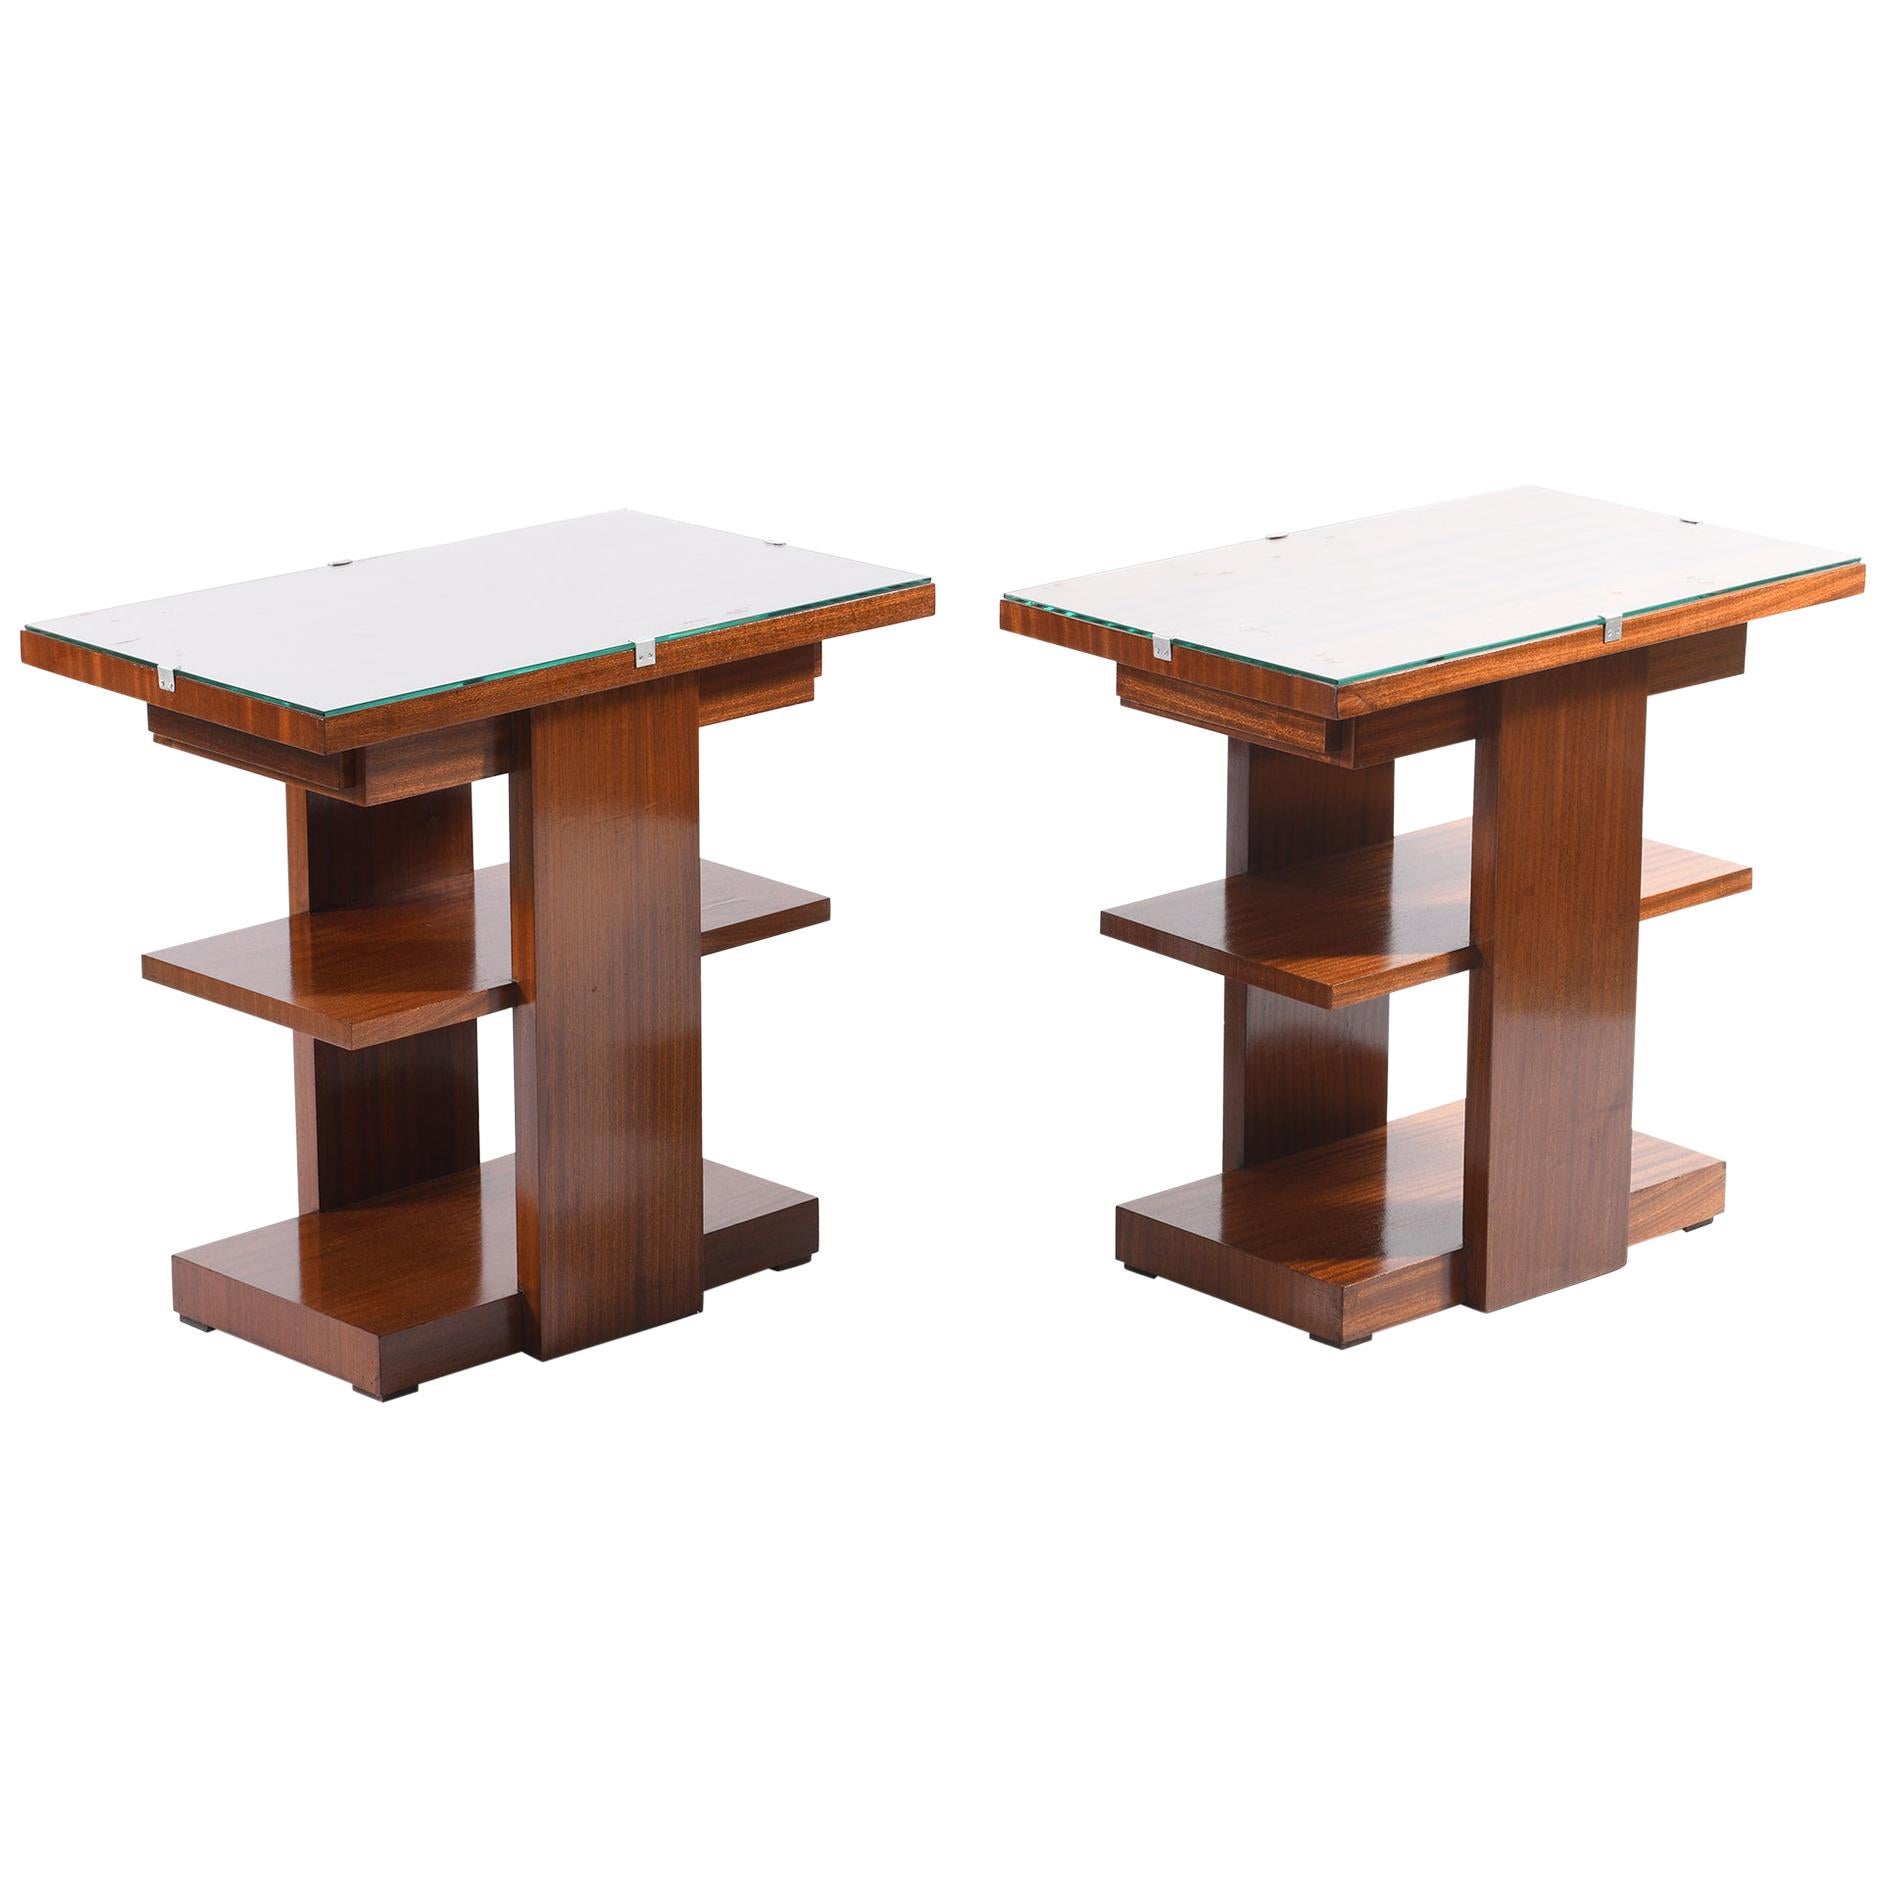 Art Deco Pair of Side Table or Nightstands with a Drawer and Shelves